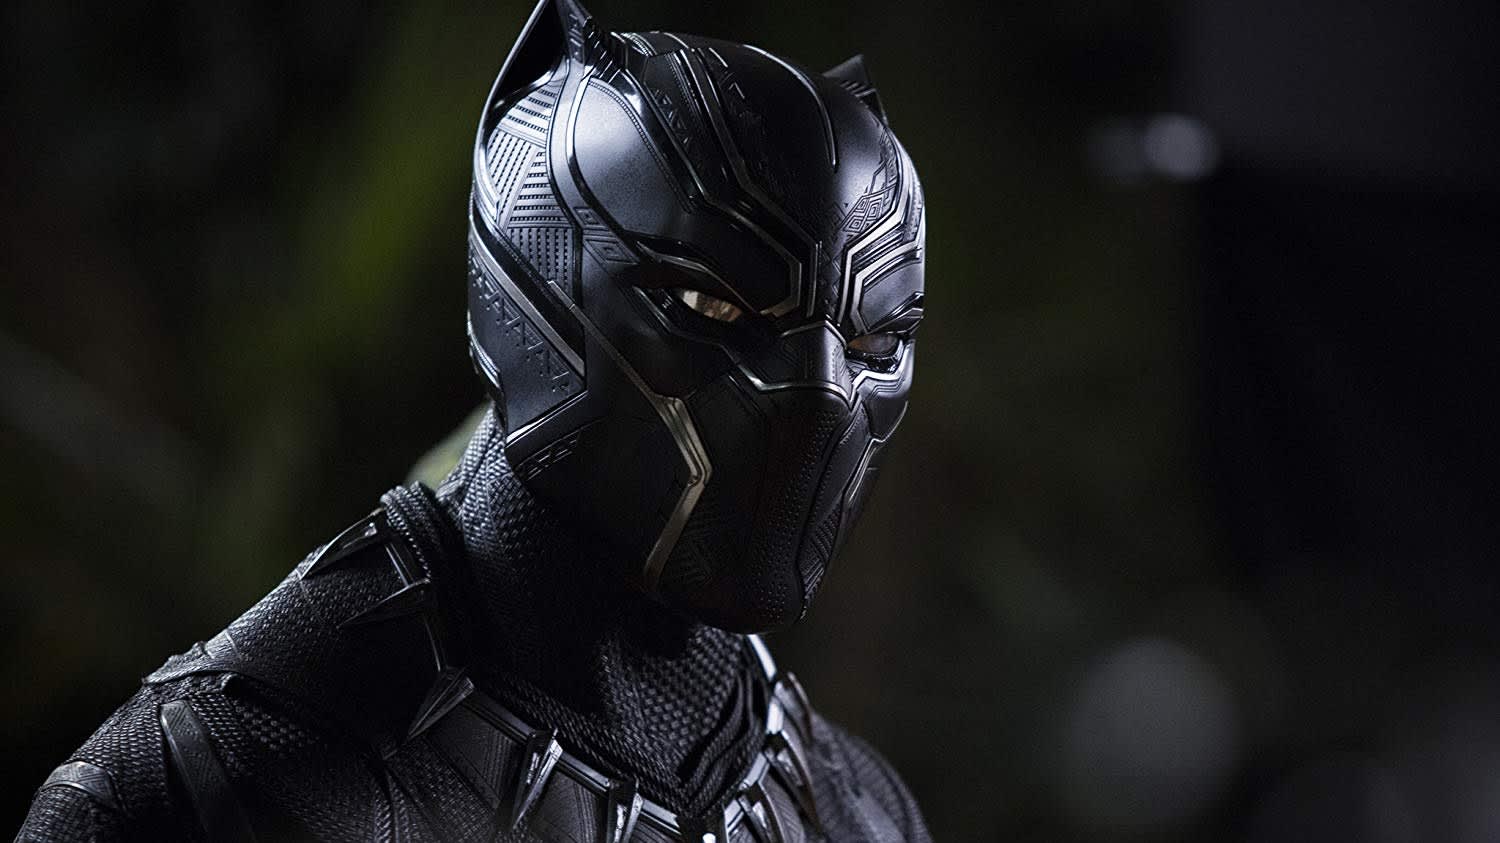 Marvel's 'Black Panther' Sequel Shoot to Begin in July (Exclusive)